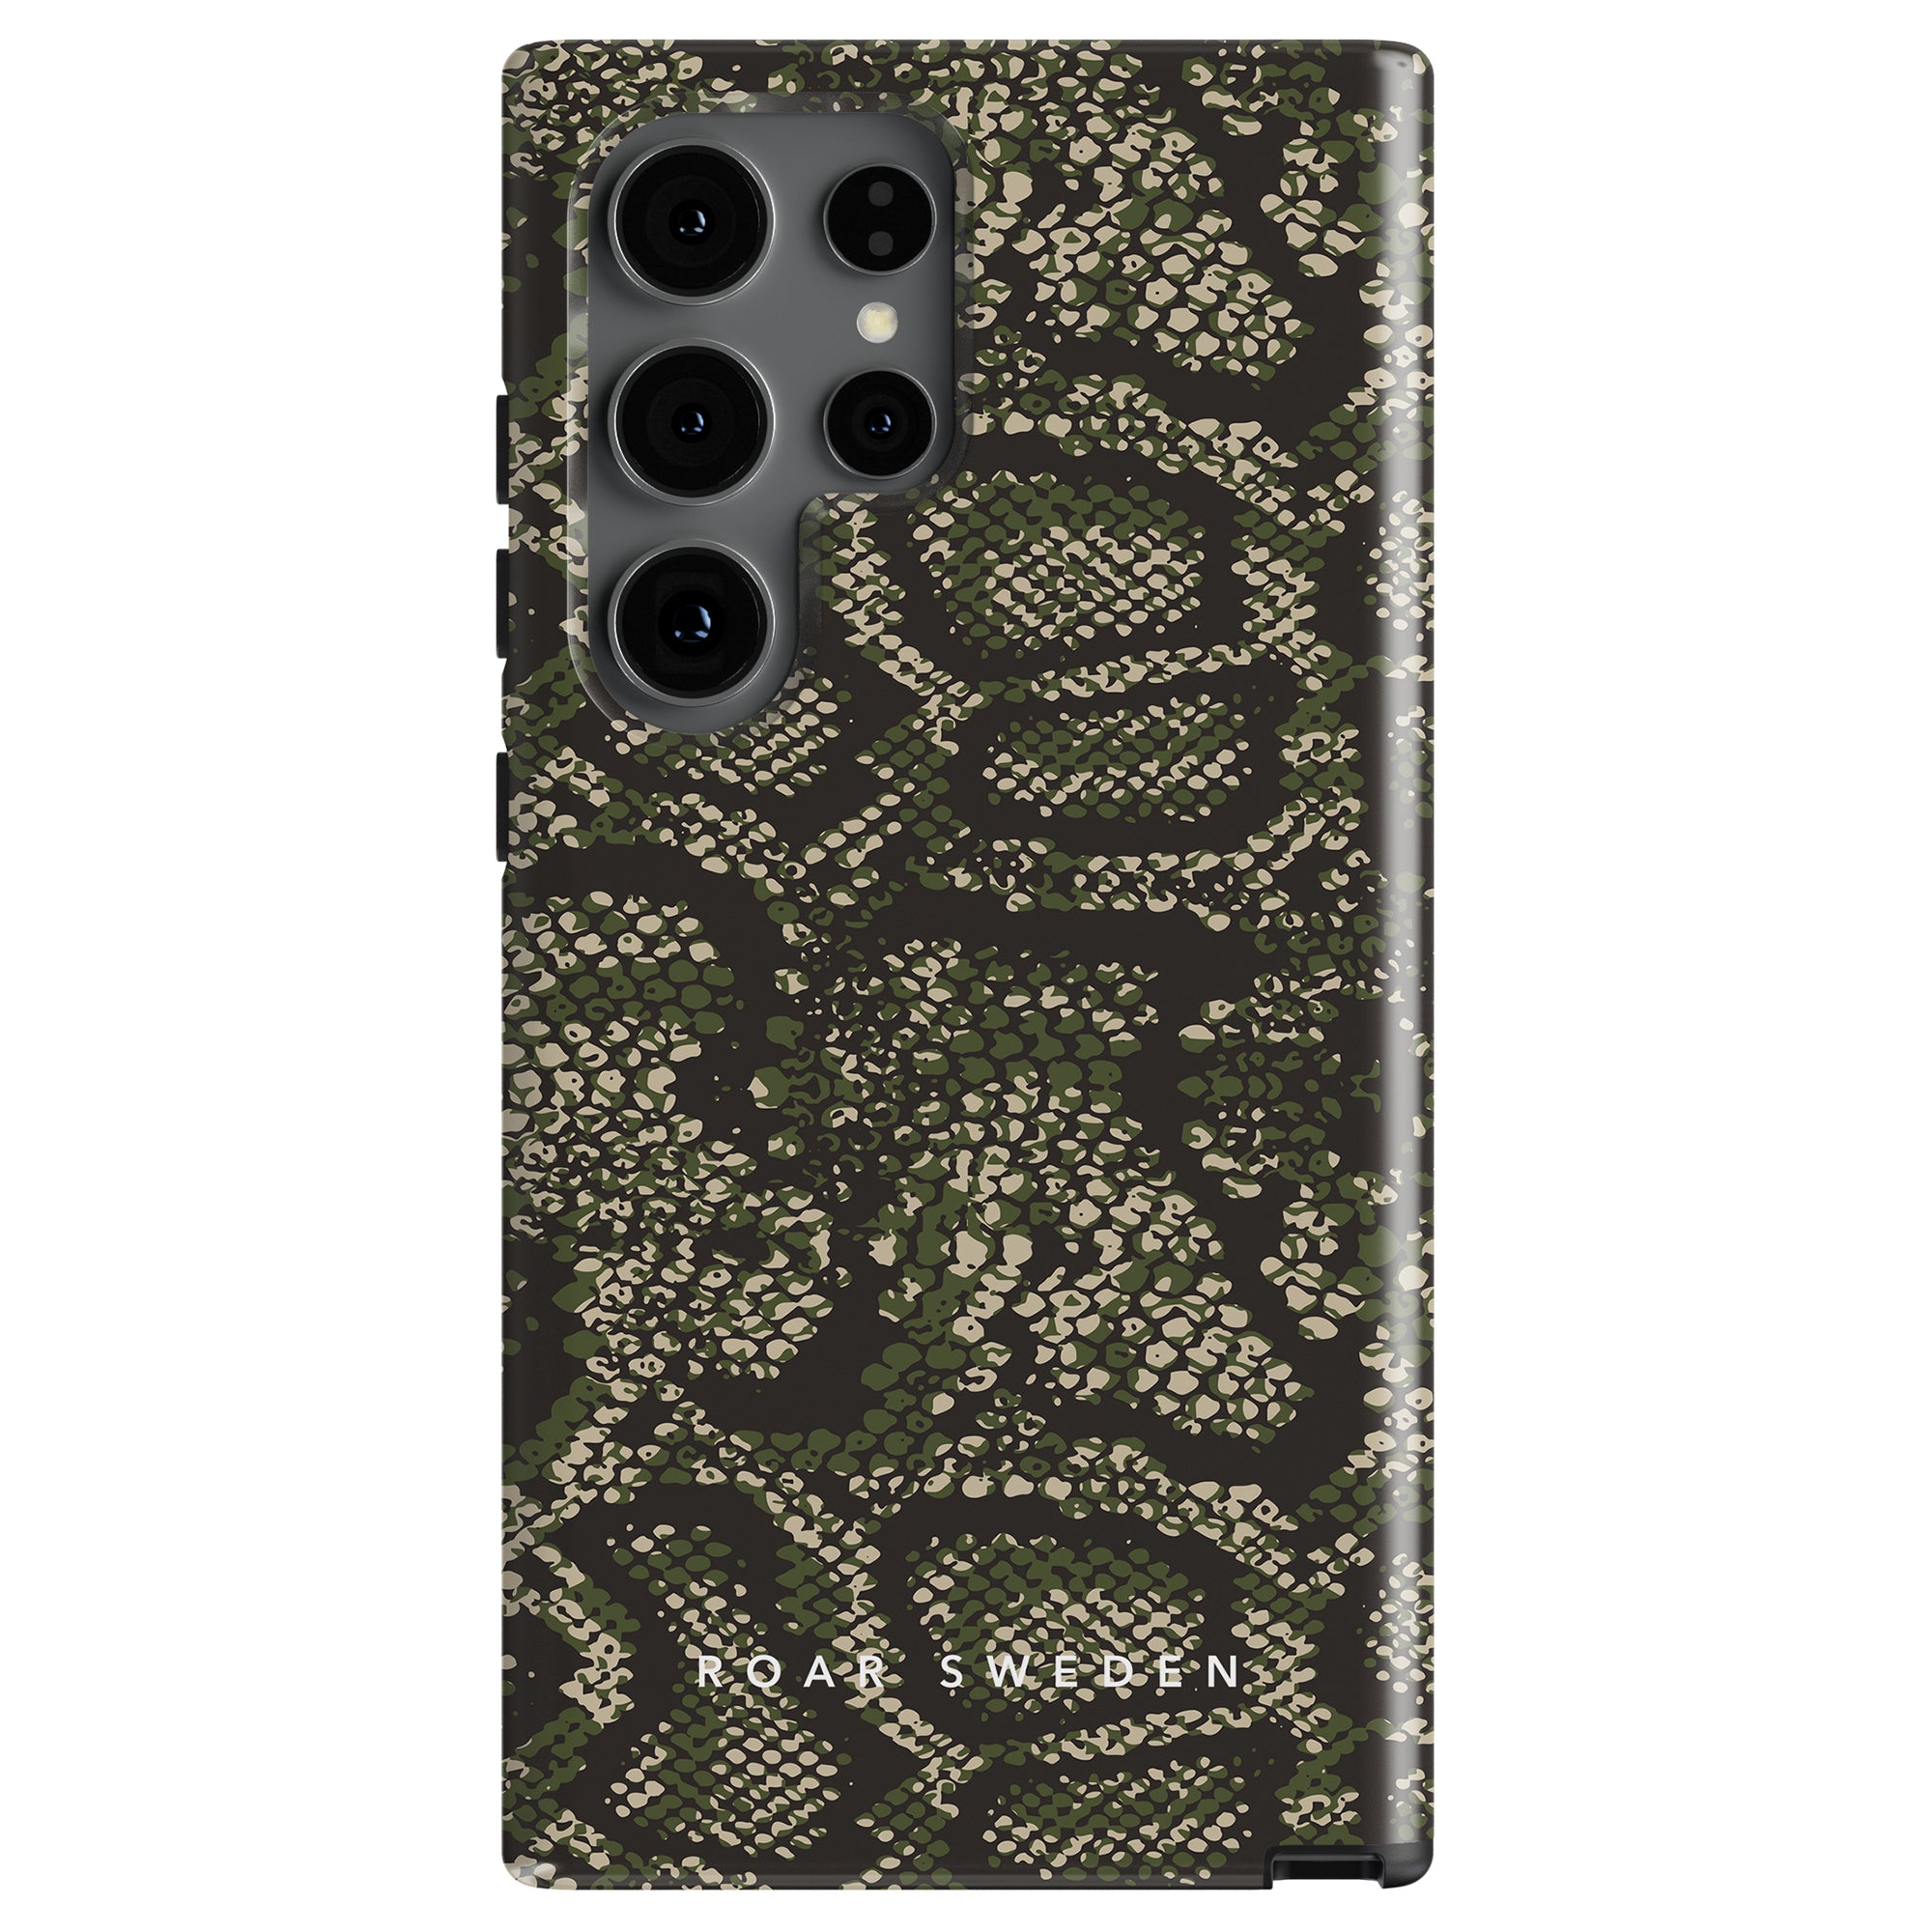 A smartphone featuring a Camo Snakes - Tough Case with a camouflage pattern and four rear cameras, proudly displaying the text "Roar Sweden" at the bottom.